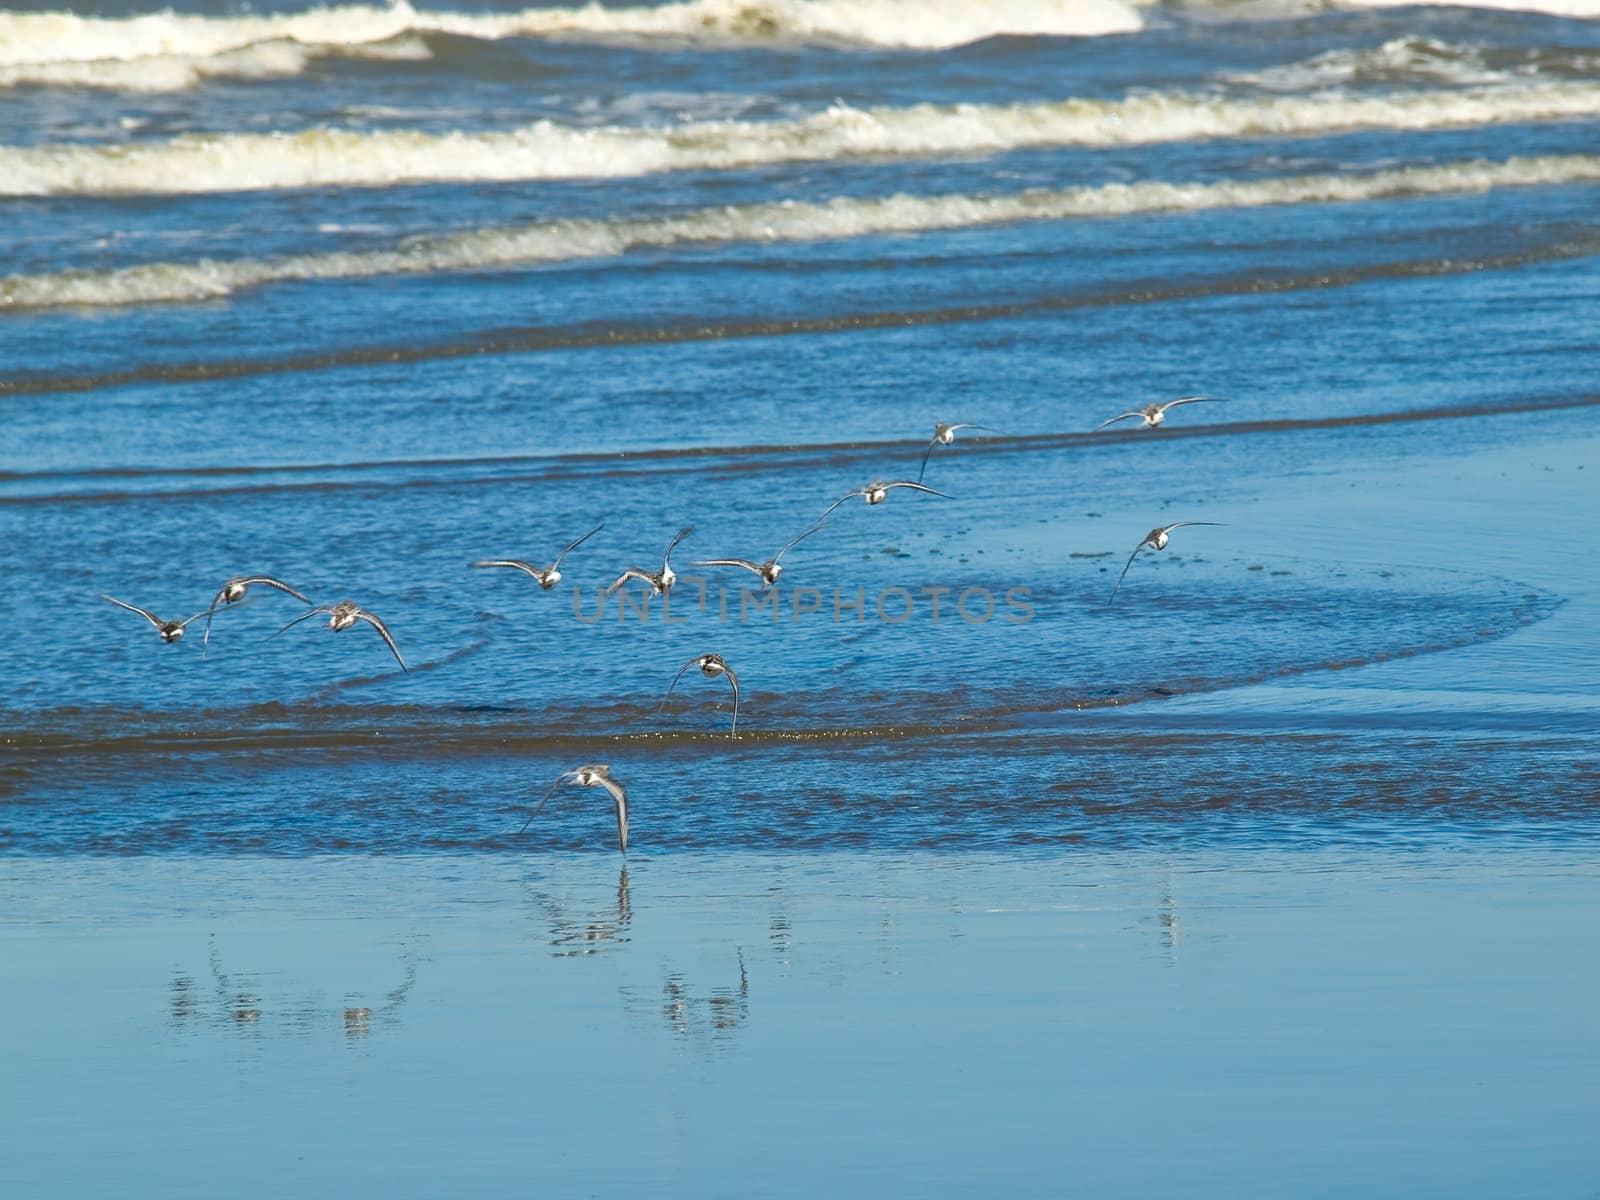 A Flock of Little Brown Seabirds at the Seashore